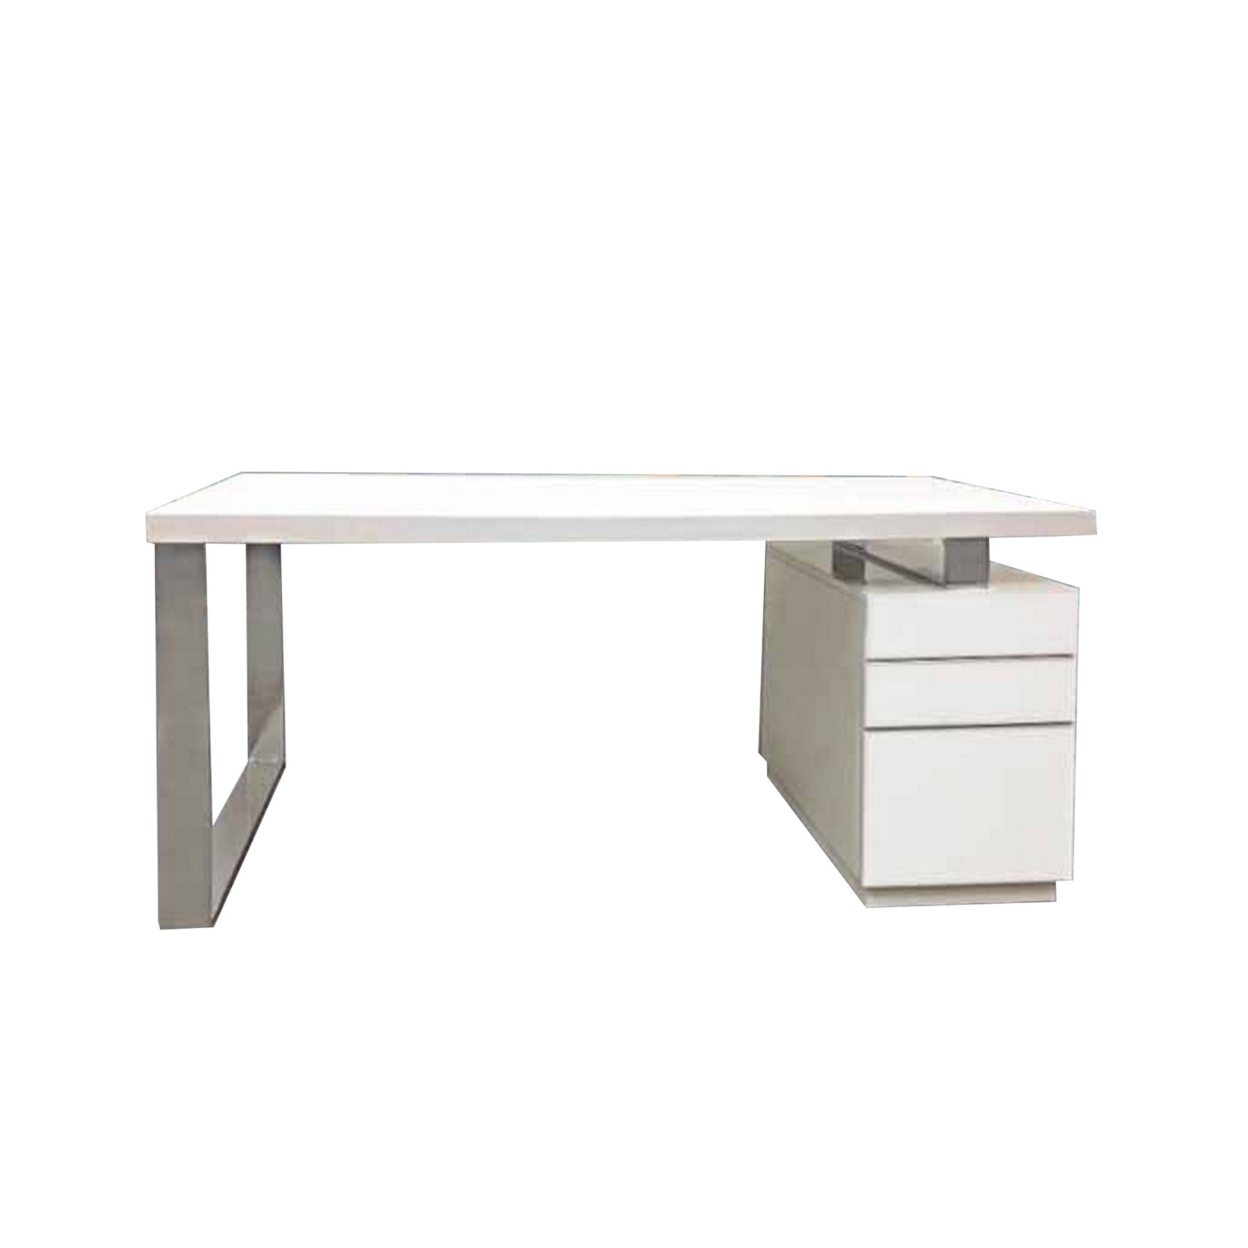 28 Inch Office Computer Desk With File Cabinet Drawers, Chrome Legs, White, Saltoro Sherpi